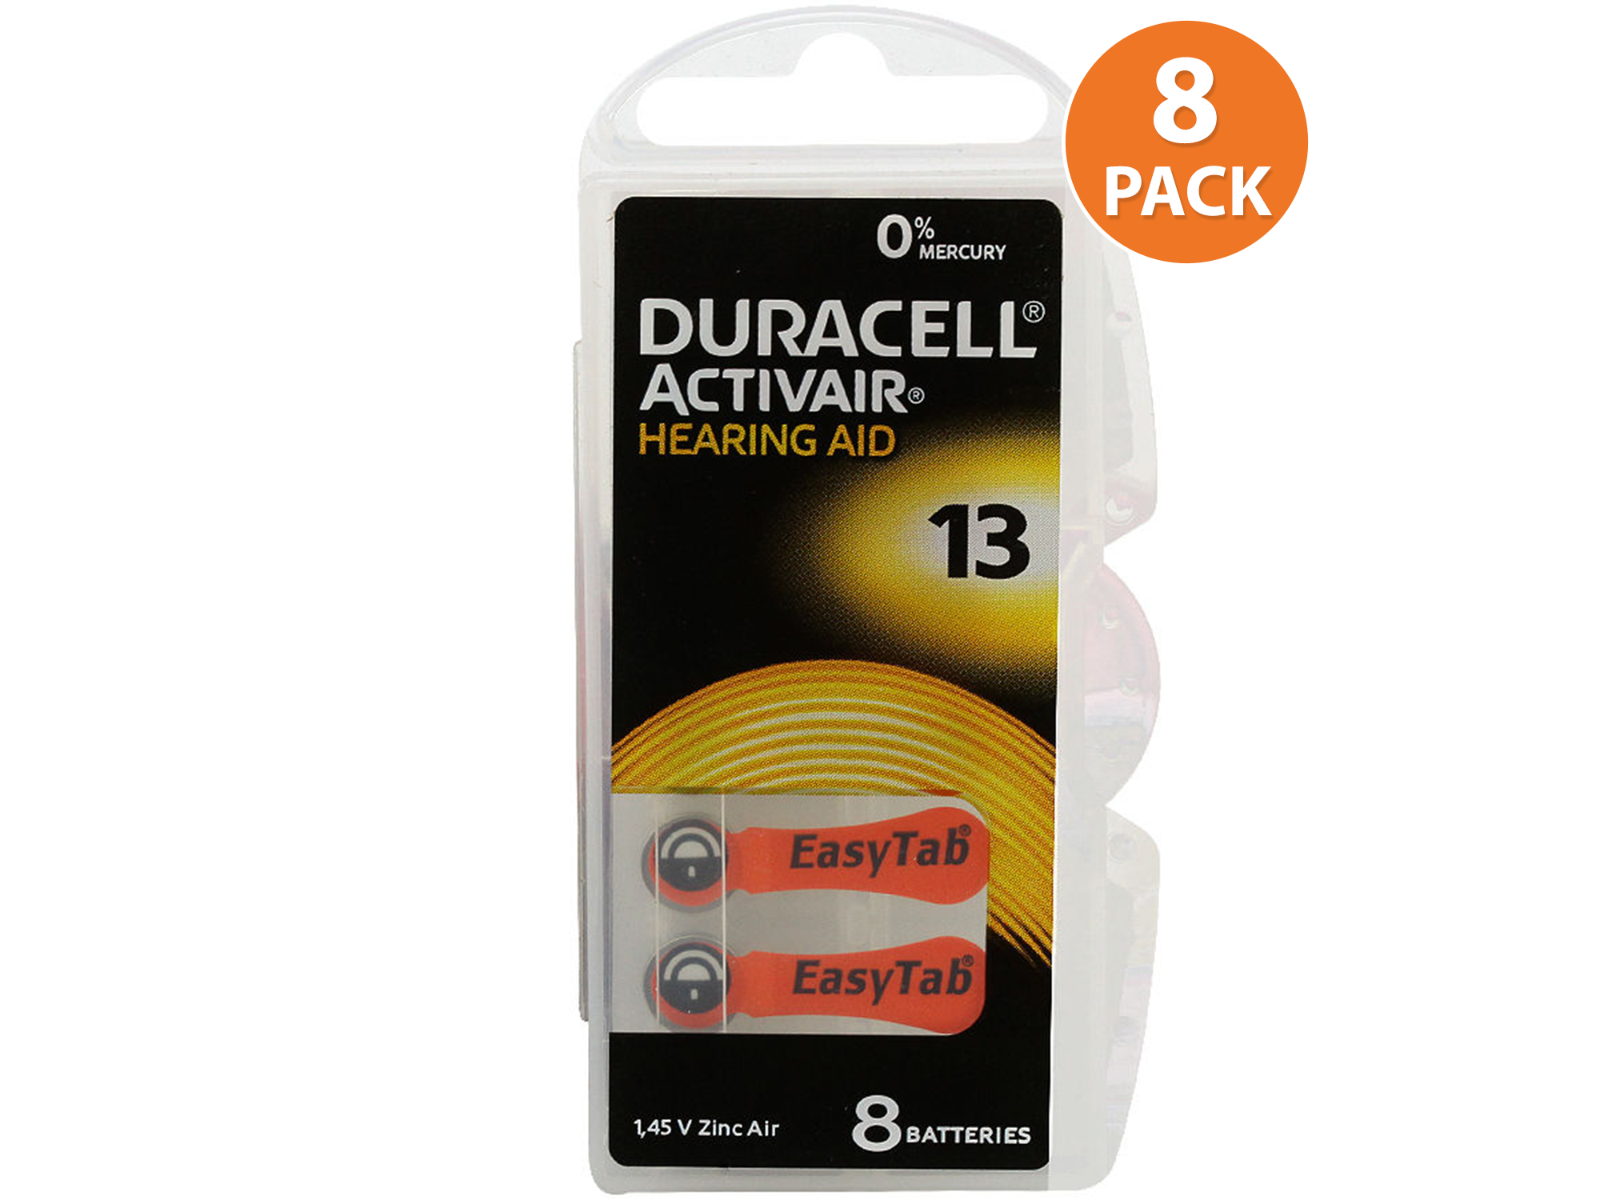 Duracell 13 Hearing Aid Battery